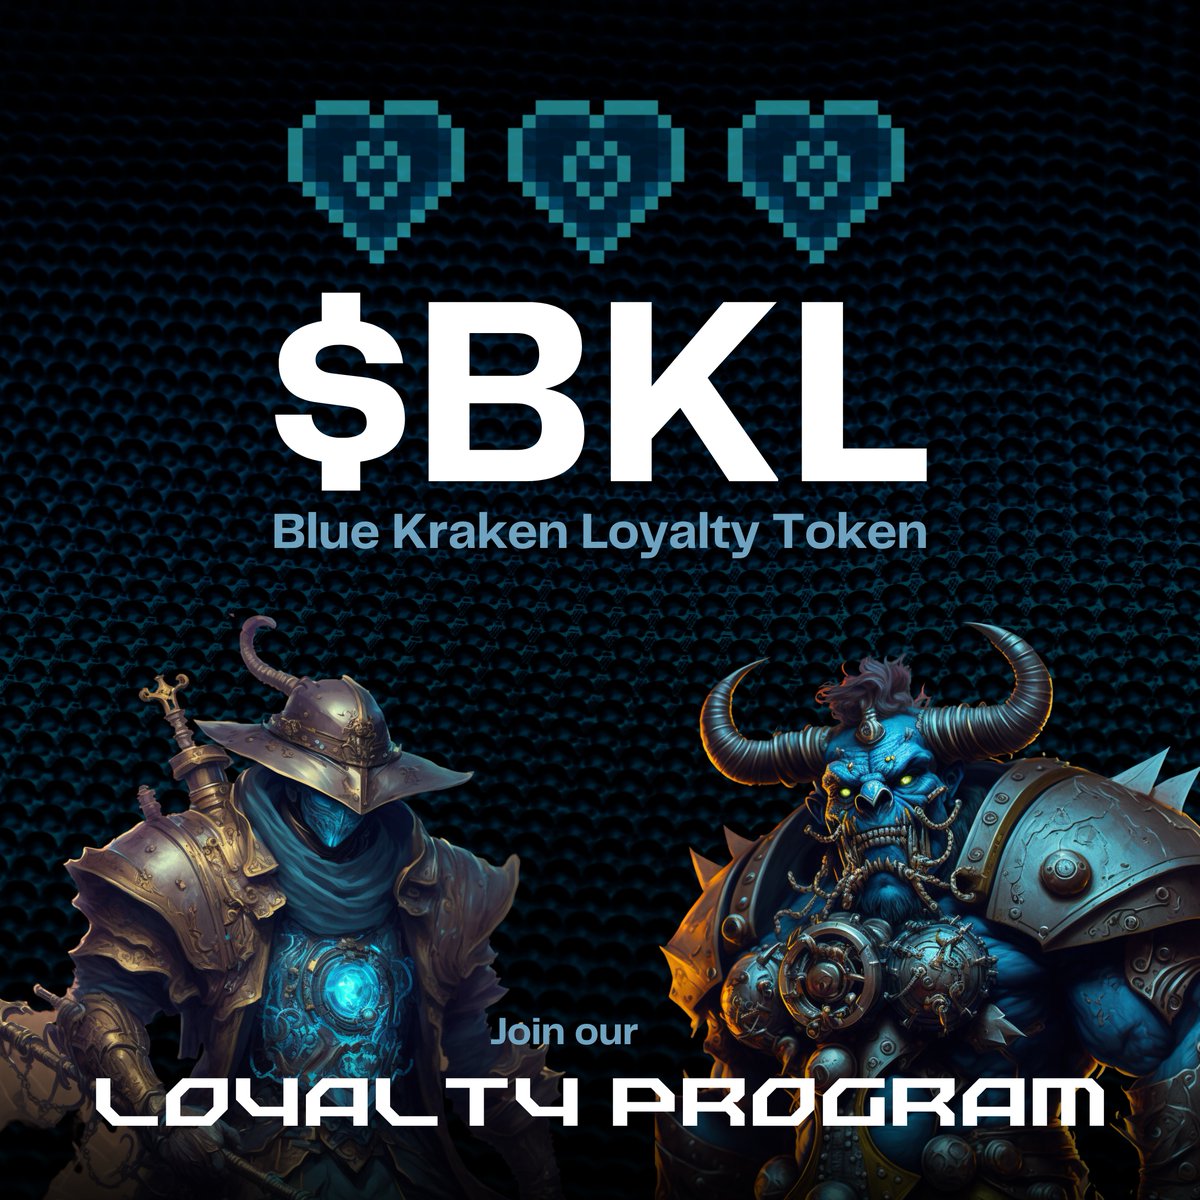 New $BKL (Blue Kraken Loyalty) contract dropping April 11th, 2023 at 6:30 am (CET)! ⏰

Contract ID:
0x228Ee1332CfEC2aB1363C4a50F8B3Bc6e697F369

#BlueKrakenOnline #BlueKrakenLoyalty #LoyaltyProgram #Token #NFTs #CryptoGaming #MMORPG #PixelStyle #BKO #Community #SustainableEconomy